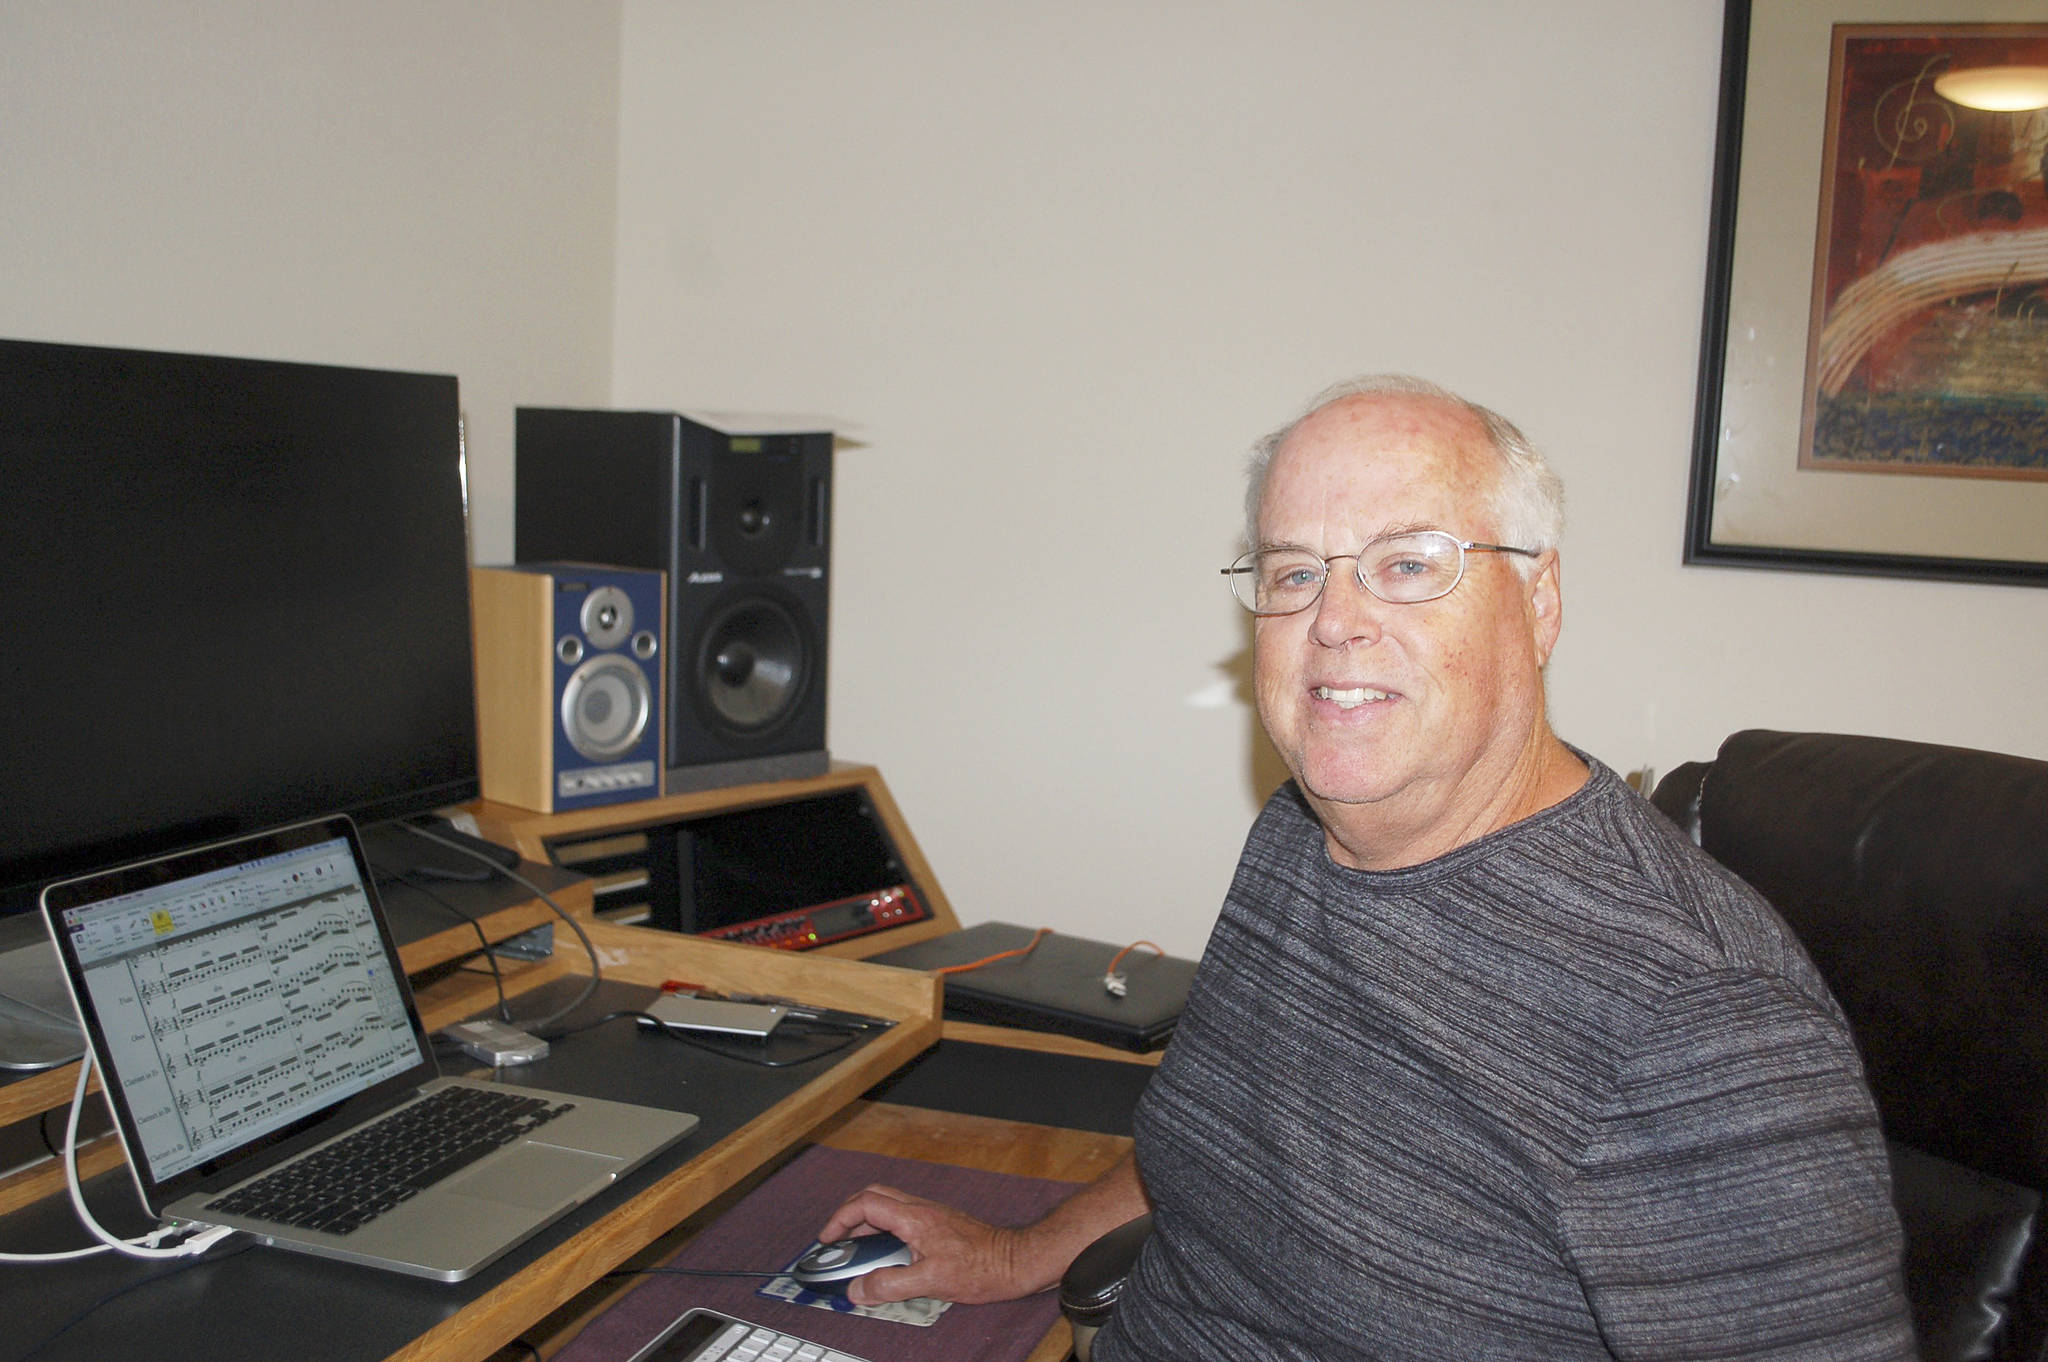 Sequim musician and music-tech educator Mike Klinger sits at his desk in his home music studio demonstrating how to use music and technology together. Sequim Gazette photo by Erin Hawkins